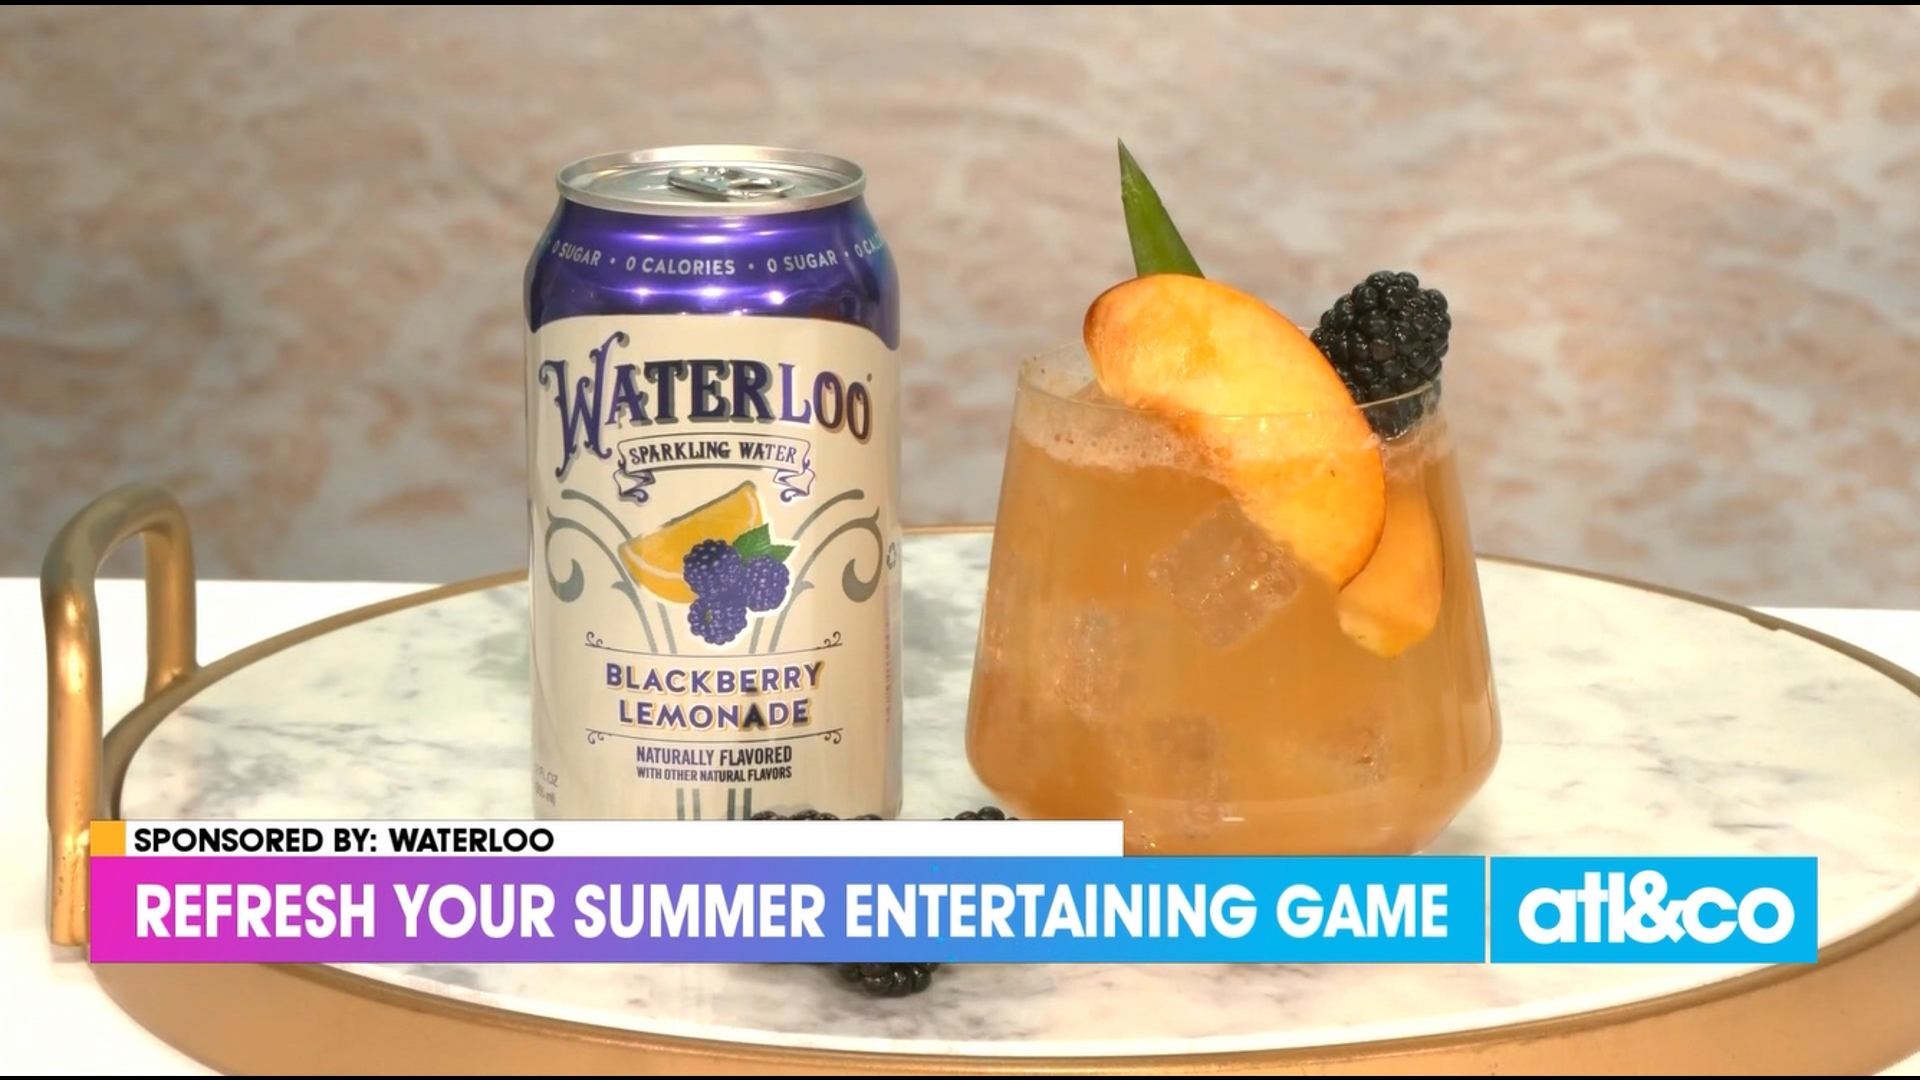 Lifestyle editor Joann Butler upgrades your summer soirees with sparkling Waterloo.